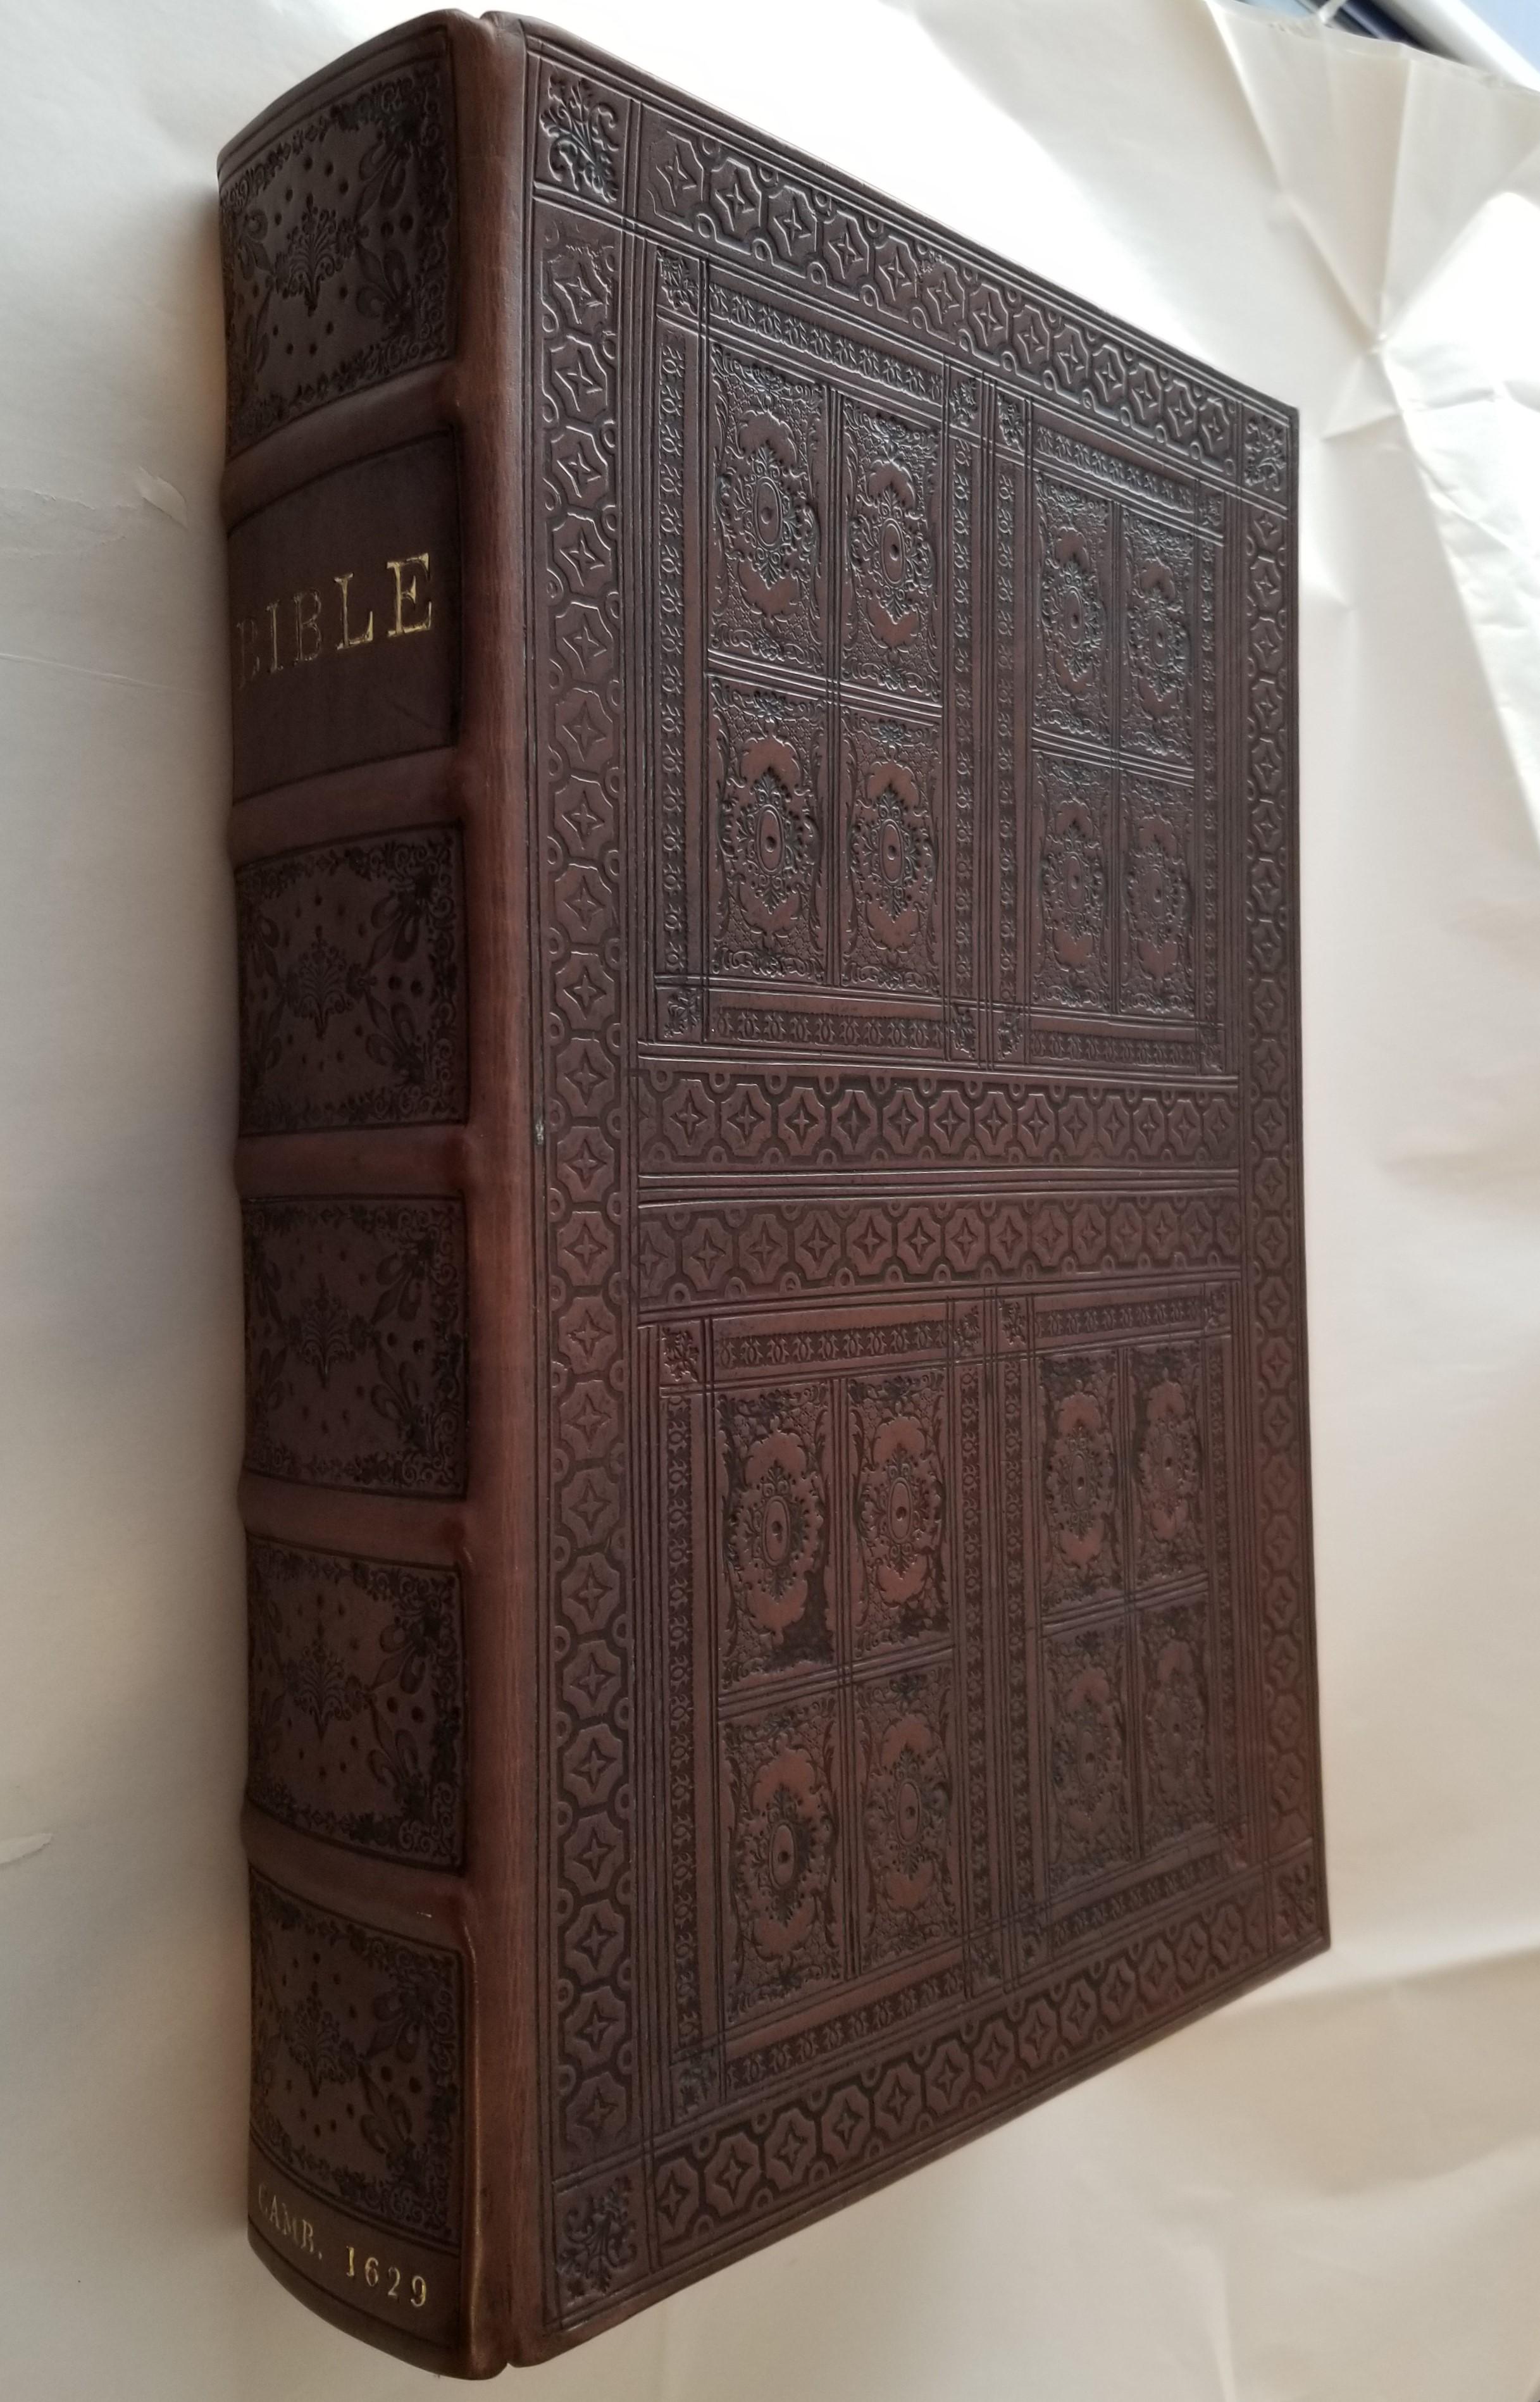 1629 Complete Cambridge Bible King James First Edition Folio Title Engraving For Sale 10